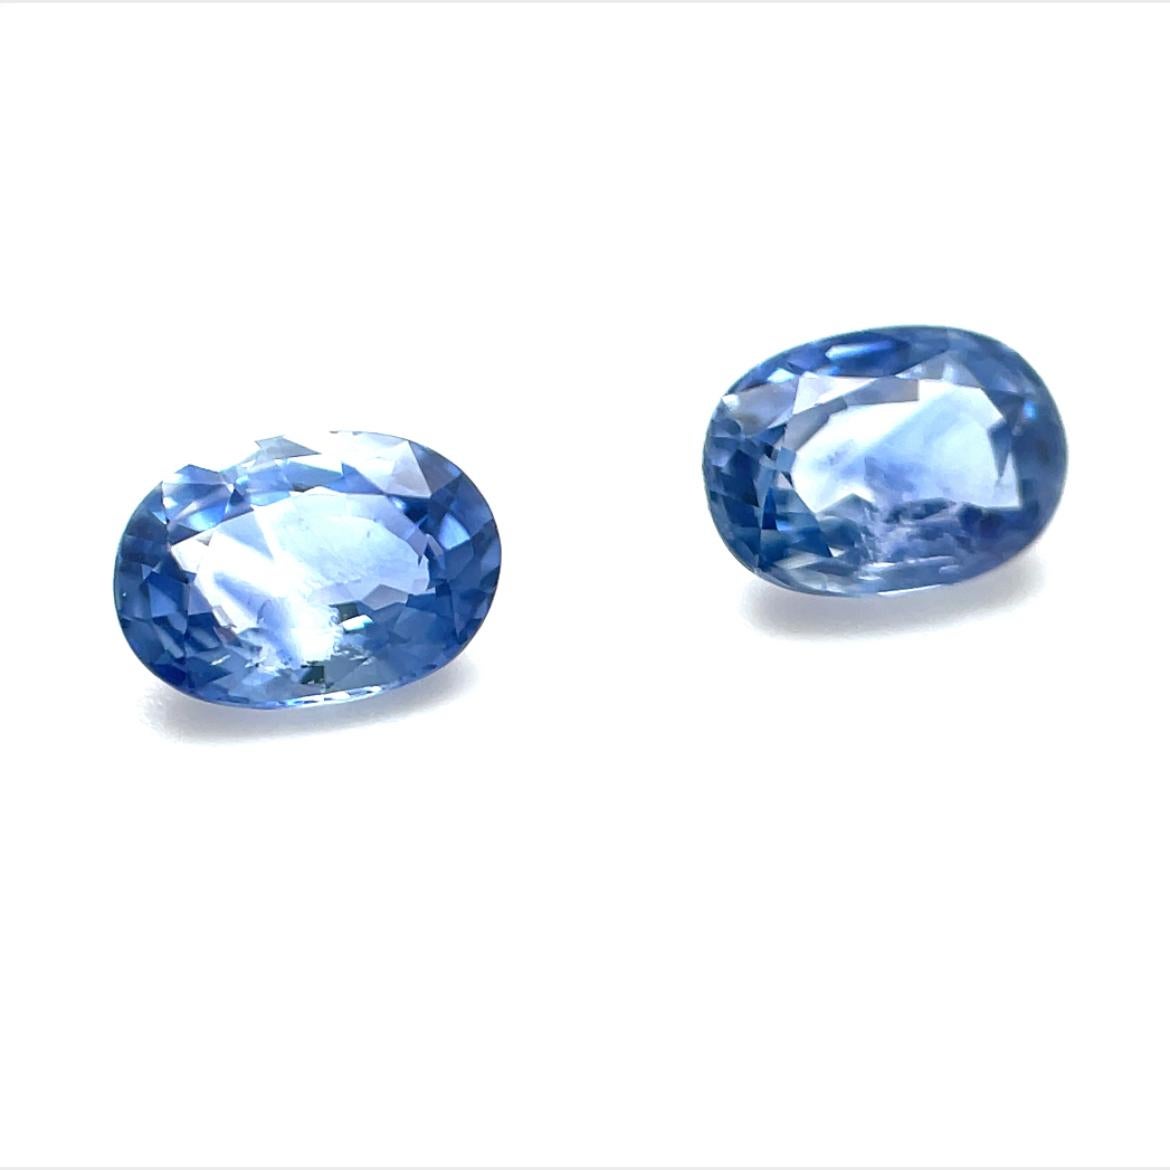 This pair of bright, powder blue sapphires will make such pretty earrings! Weighing over 2 carats total, these clean, nicely shaped ovals will look nice on their own as studs, or set with accent diamonds or other colored gems! Their lighter color is